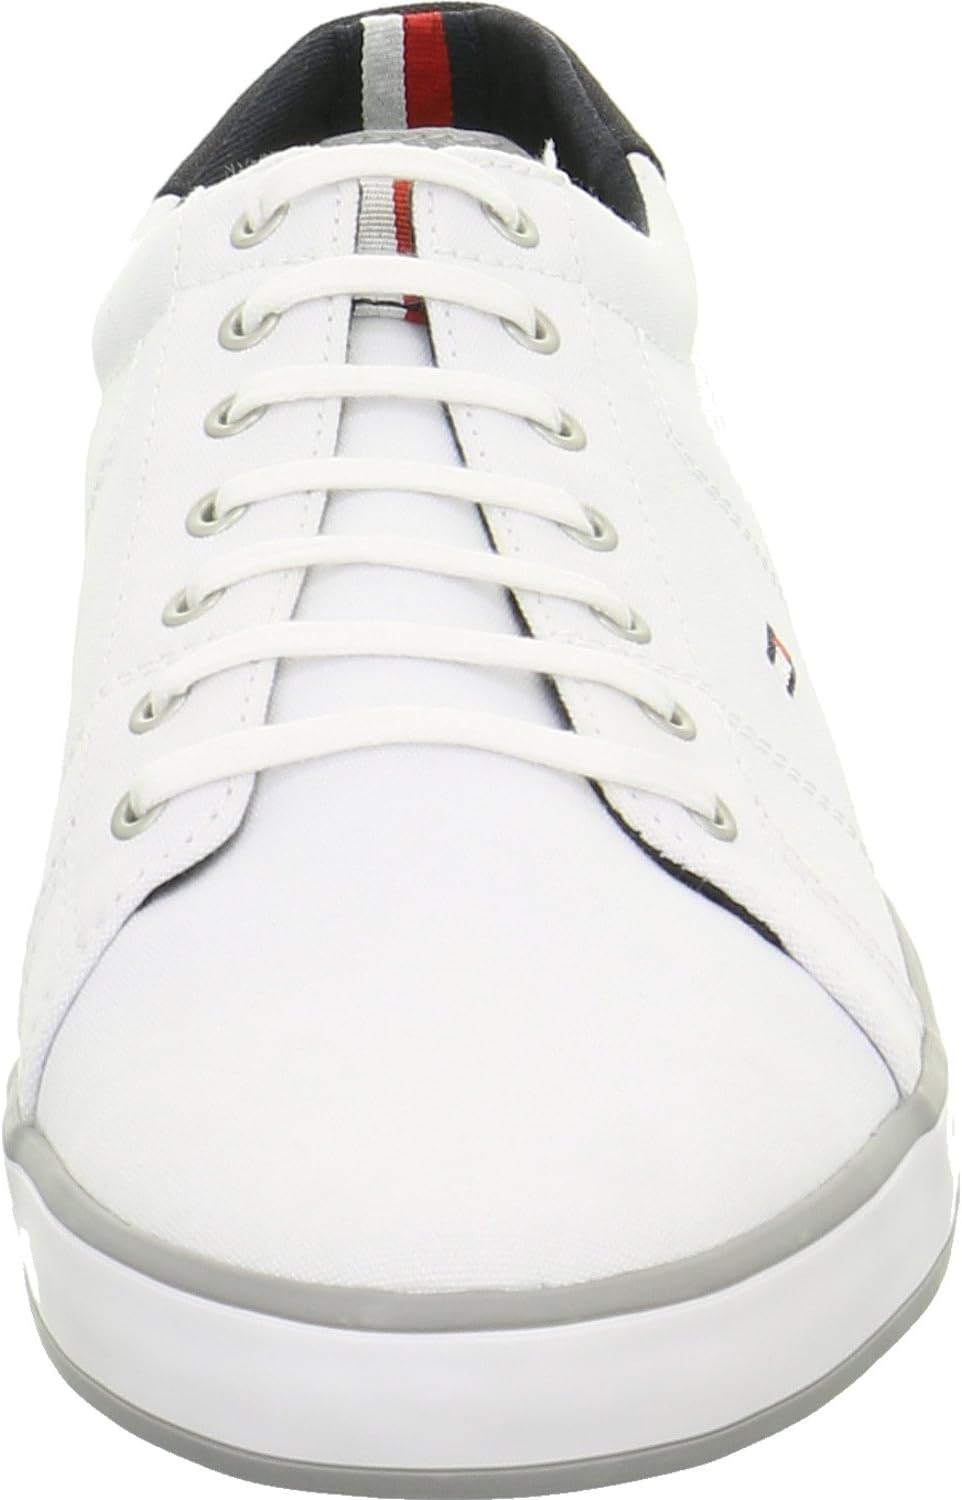 Tommy Hilfiger Men's 1d Low-Top Sneakers Rubber White (13 UK)